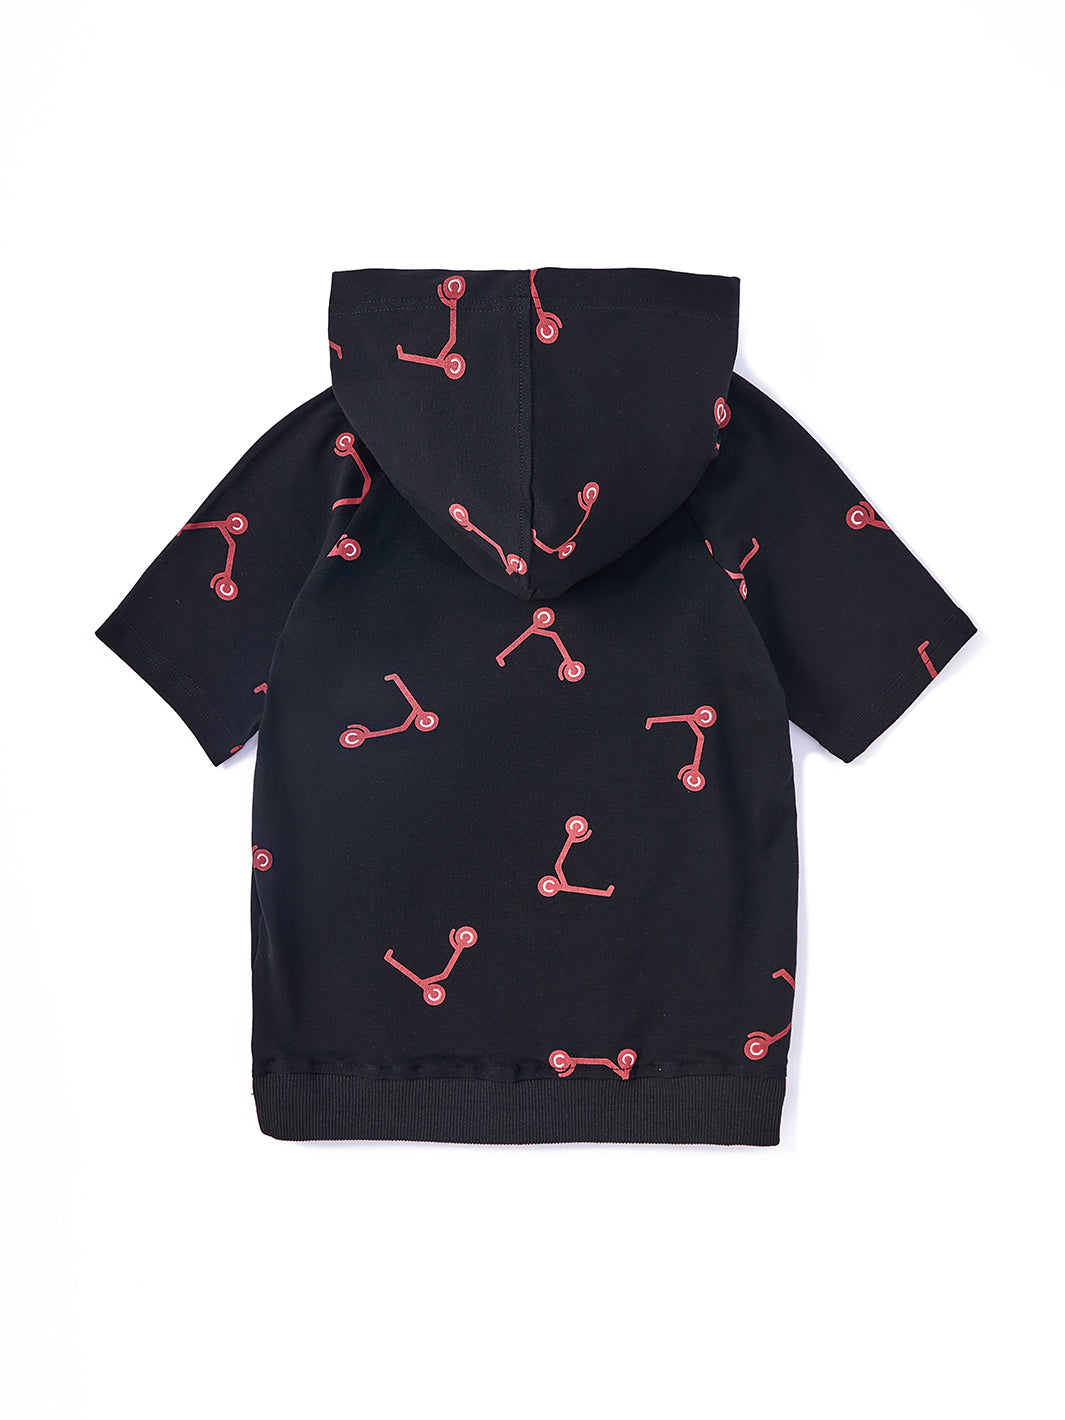 Scooter Print Short Sleeve Top